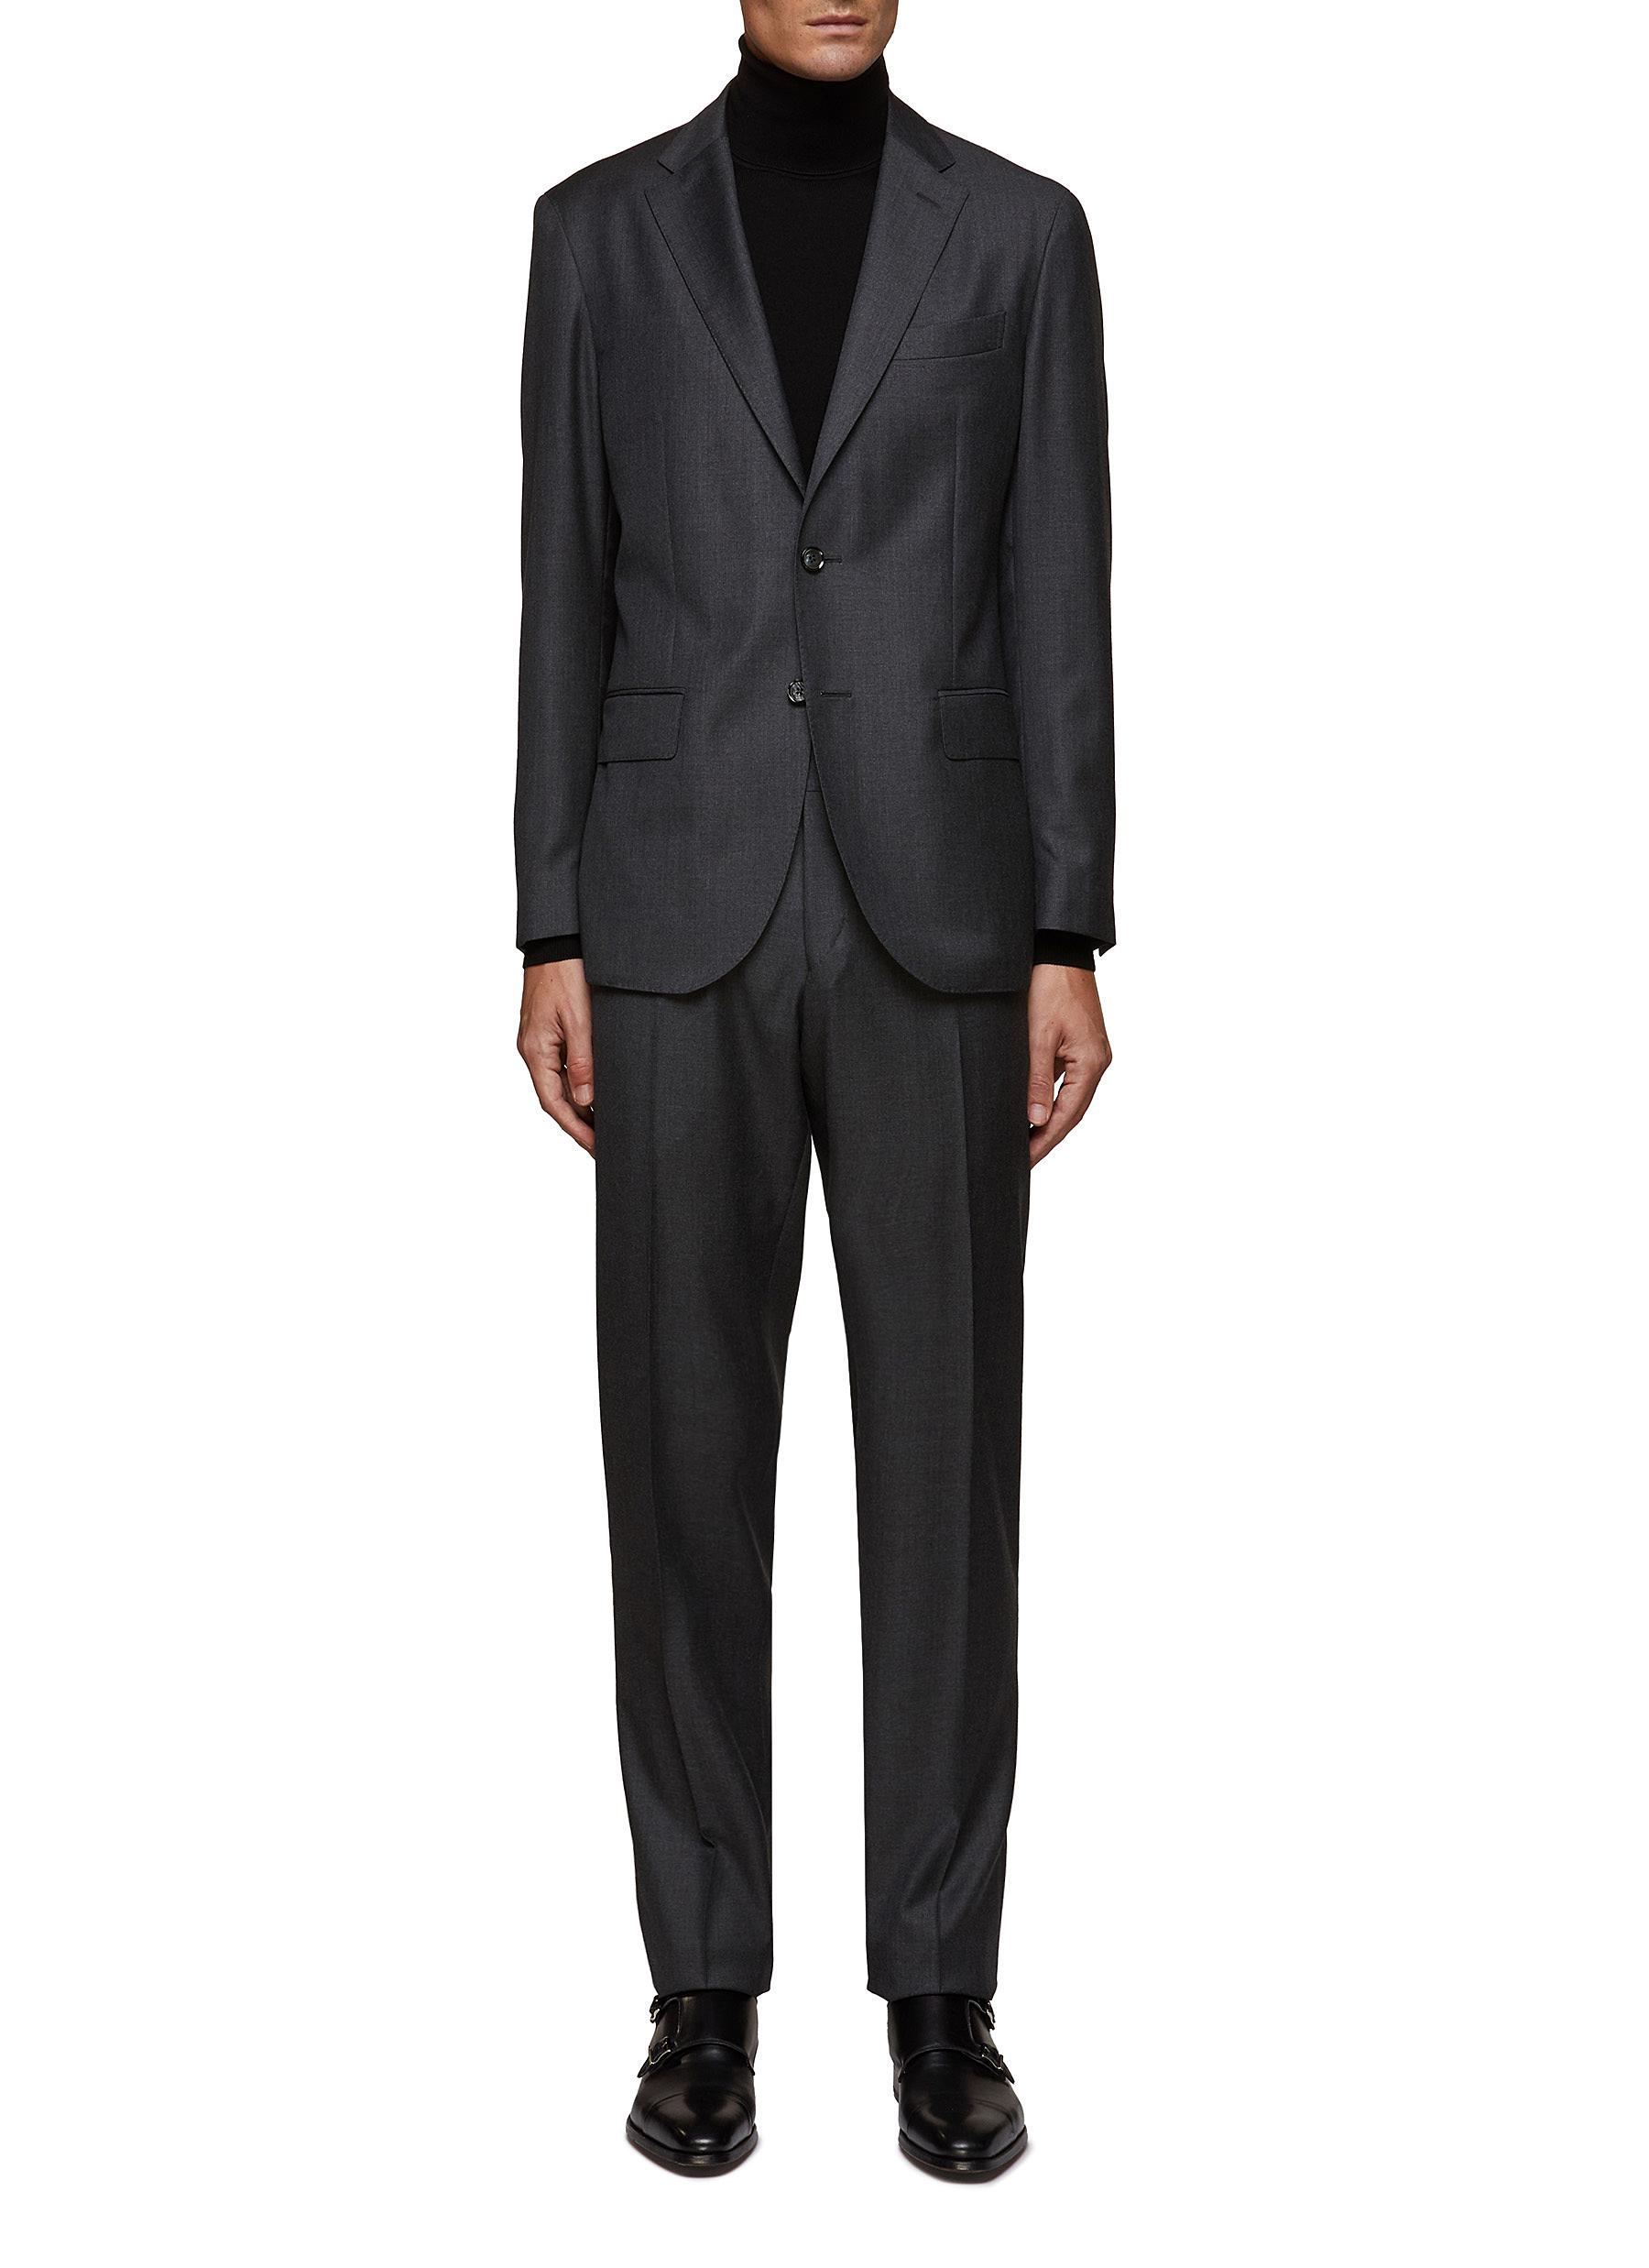 EQUIL SINGLE BREASTED NOTCH LAPEL UNLINED SUIT